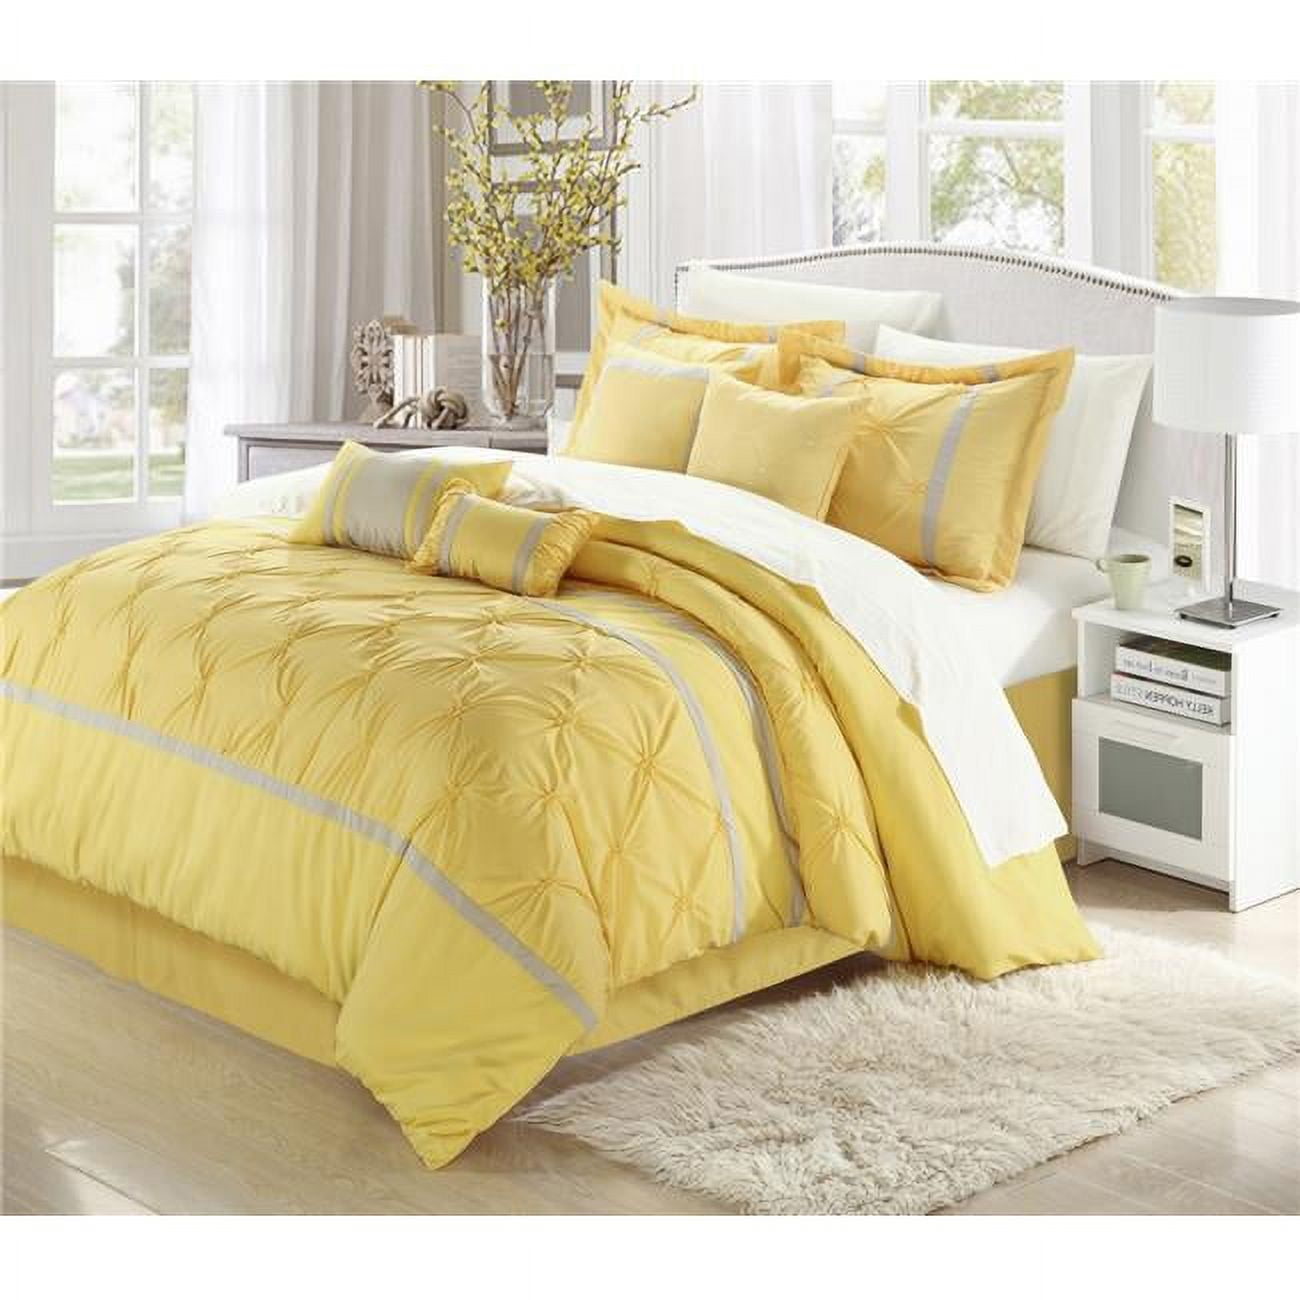 127-160-q-11-us Vermont Yellow & Grey Queen 12 Piece Bed In A Bag Comforter Set With 4 Piece Sheet Set